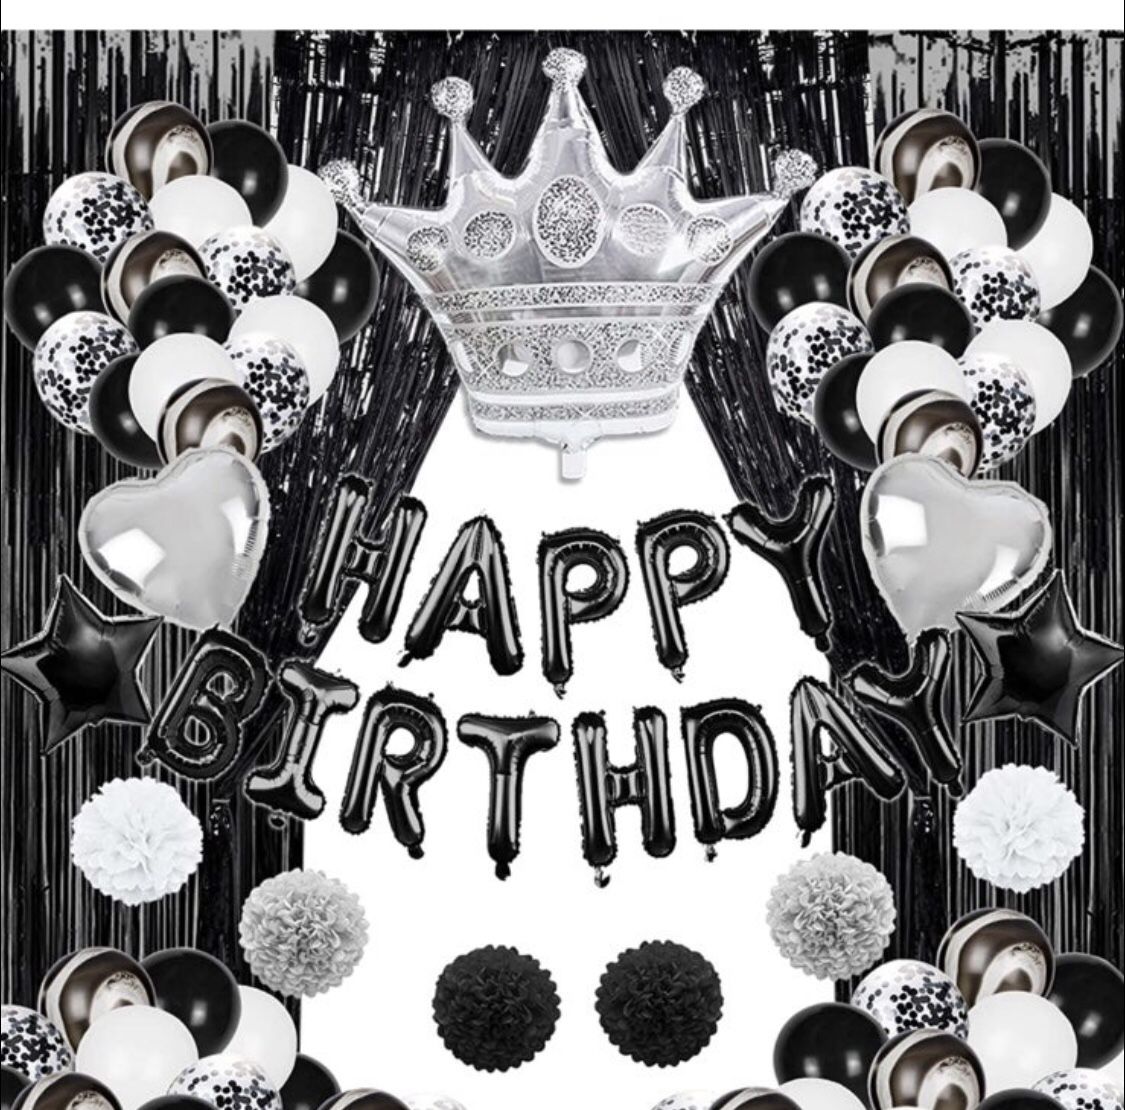 Black Birthday Party Decorations with Black and White Balloons, Paper Pom,o2,